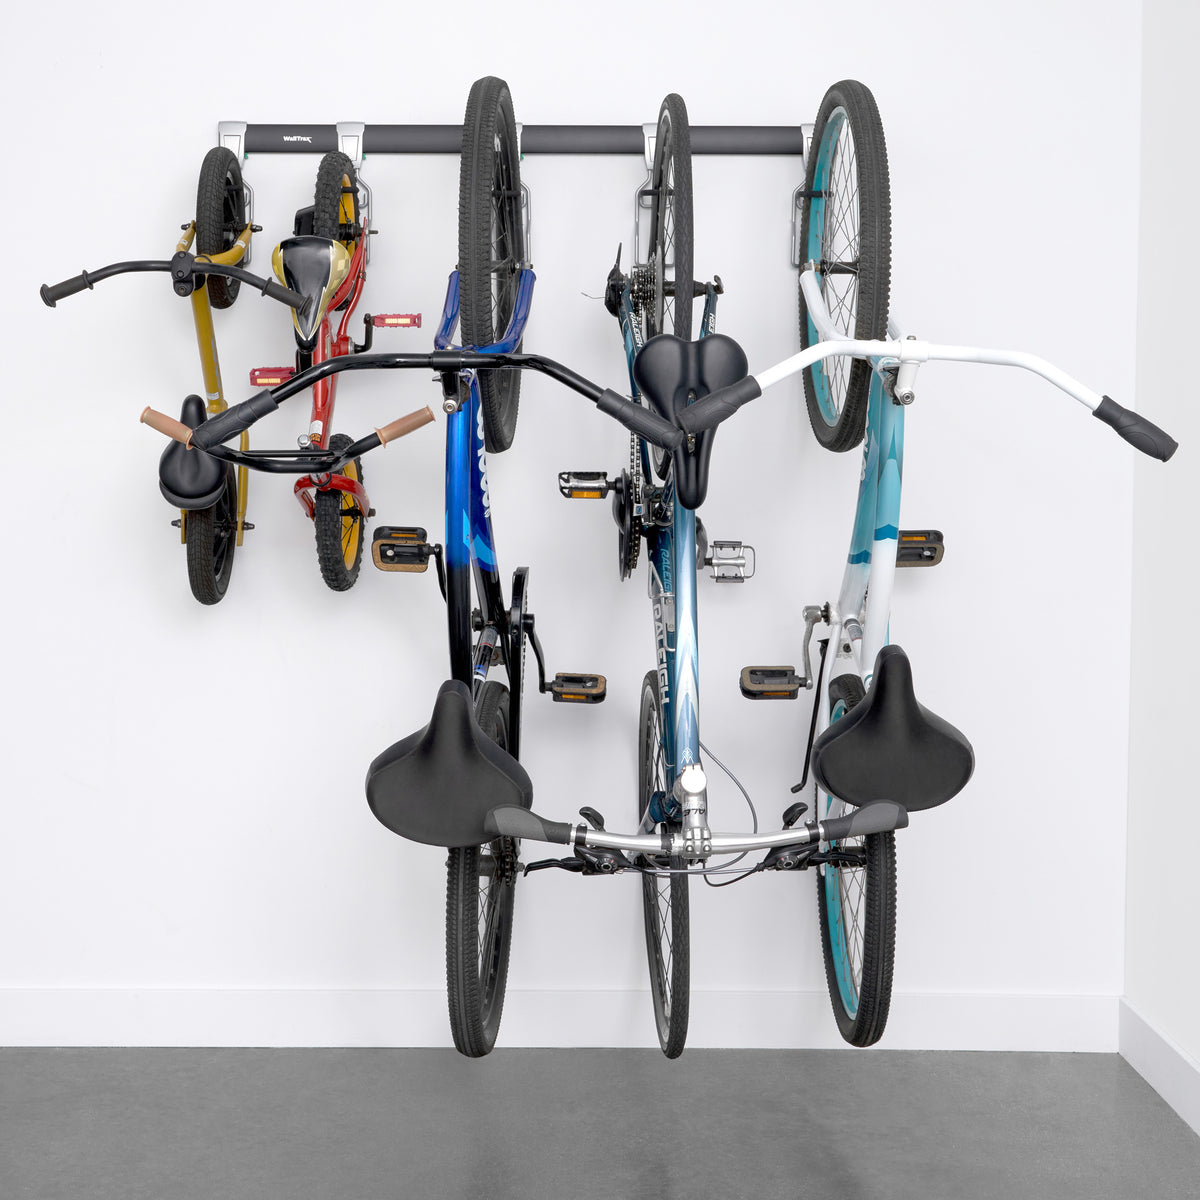 Cheap Bike Hooks - What's the Catch?